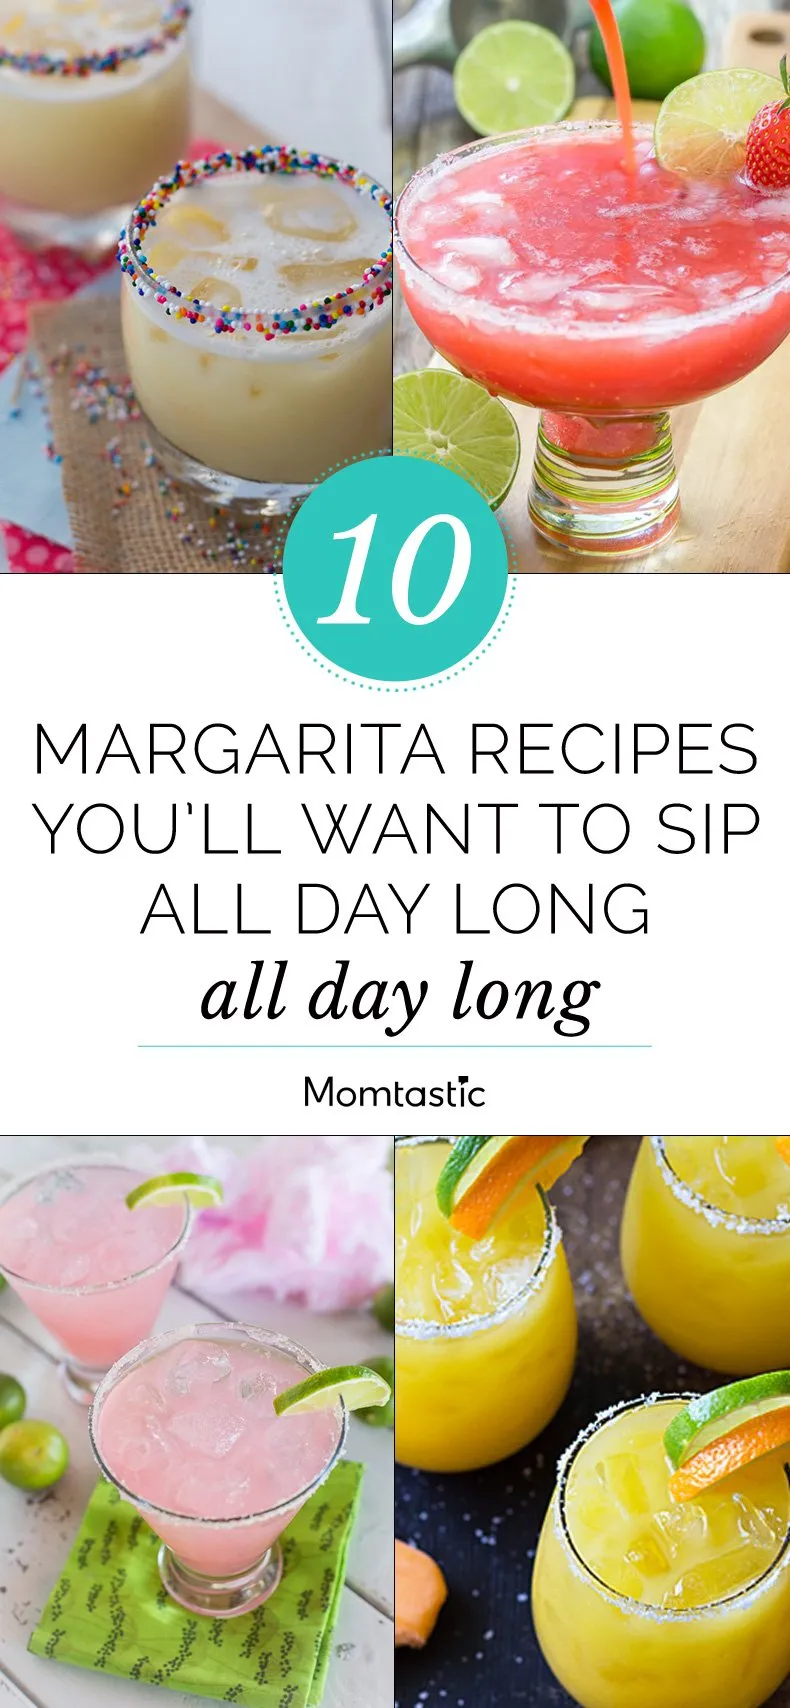 10 Margarita Recipes You’ll Want to Sip All Day Long